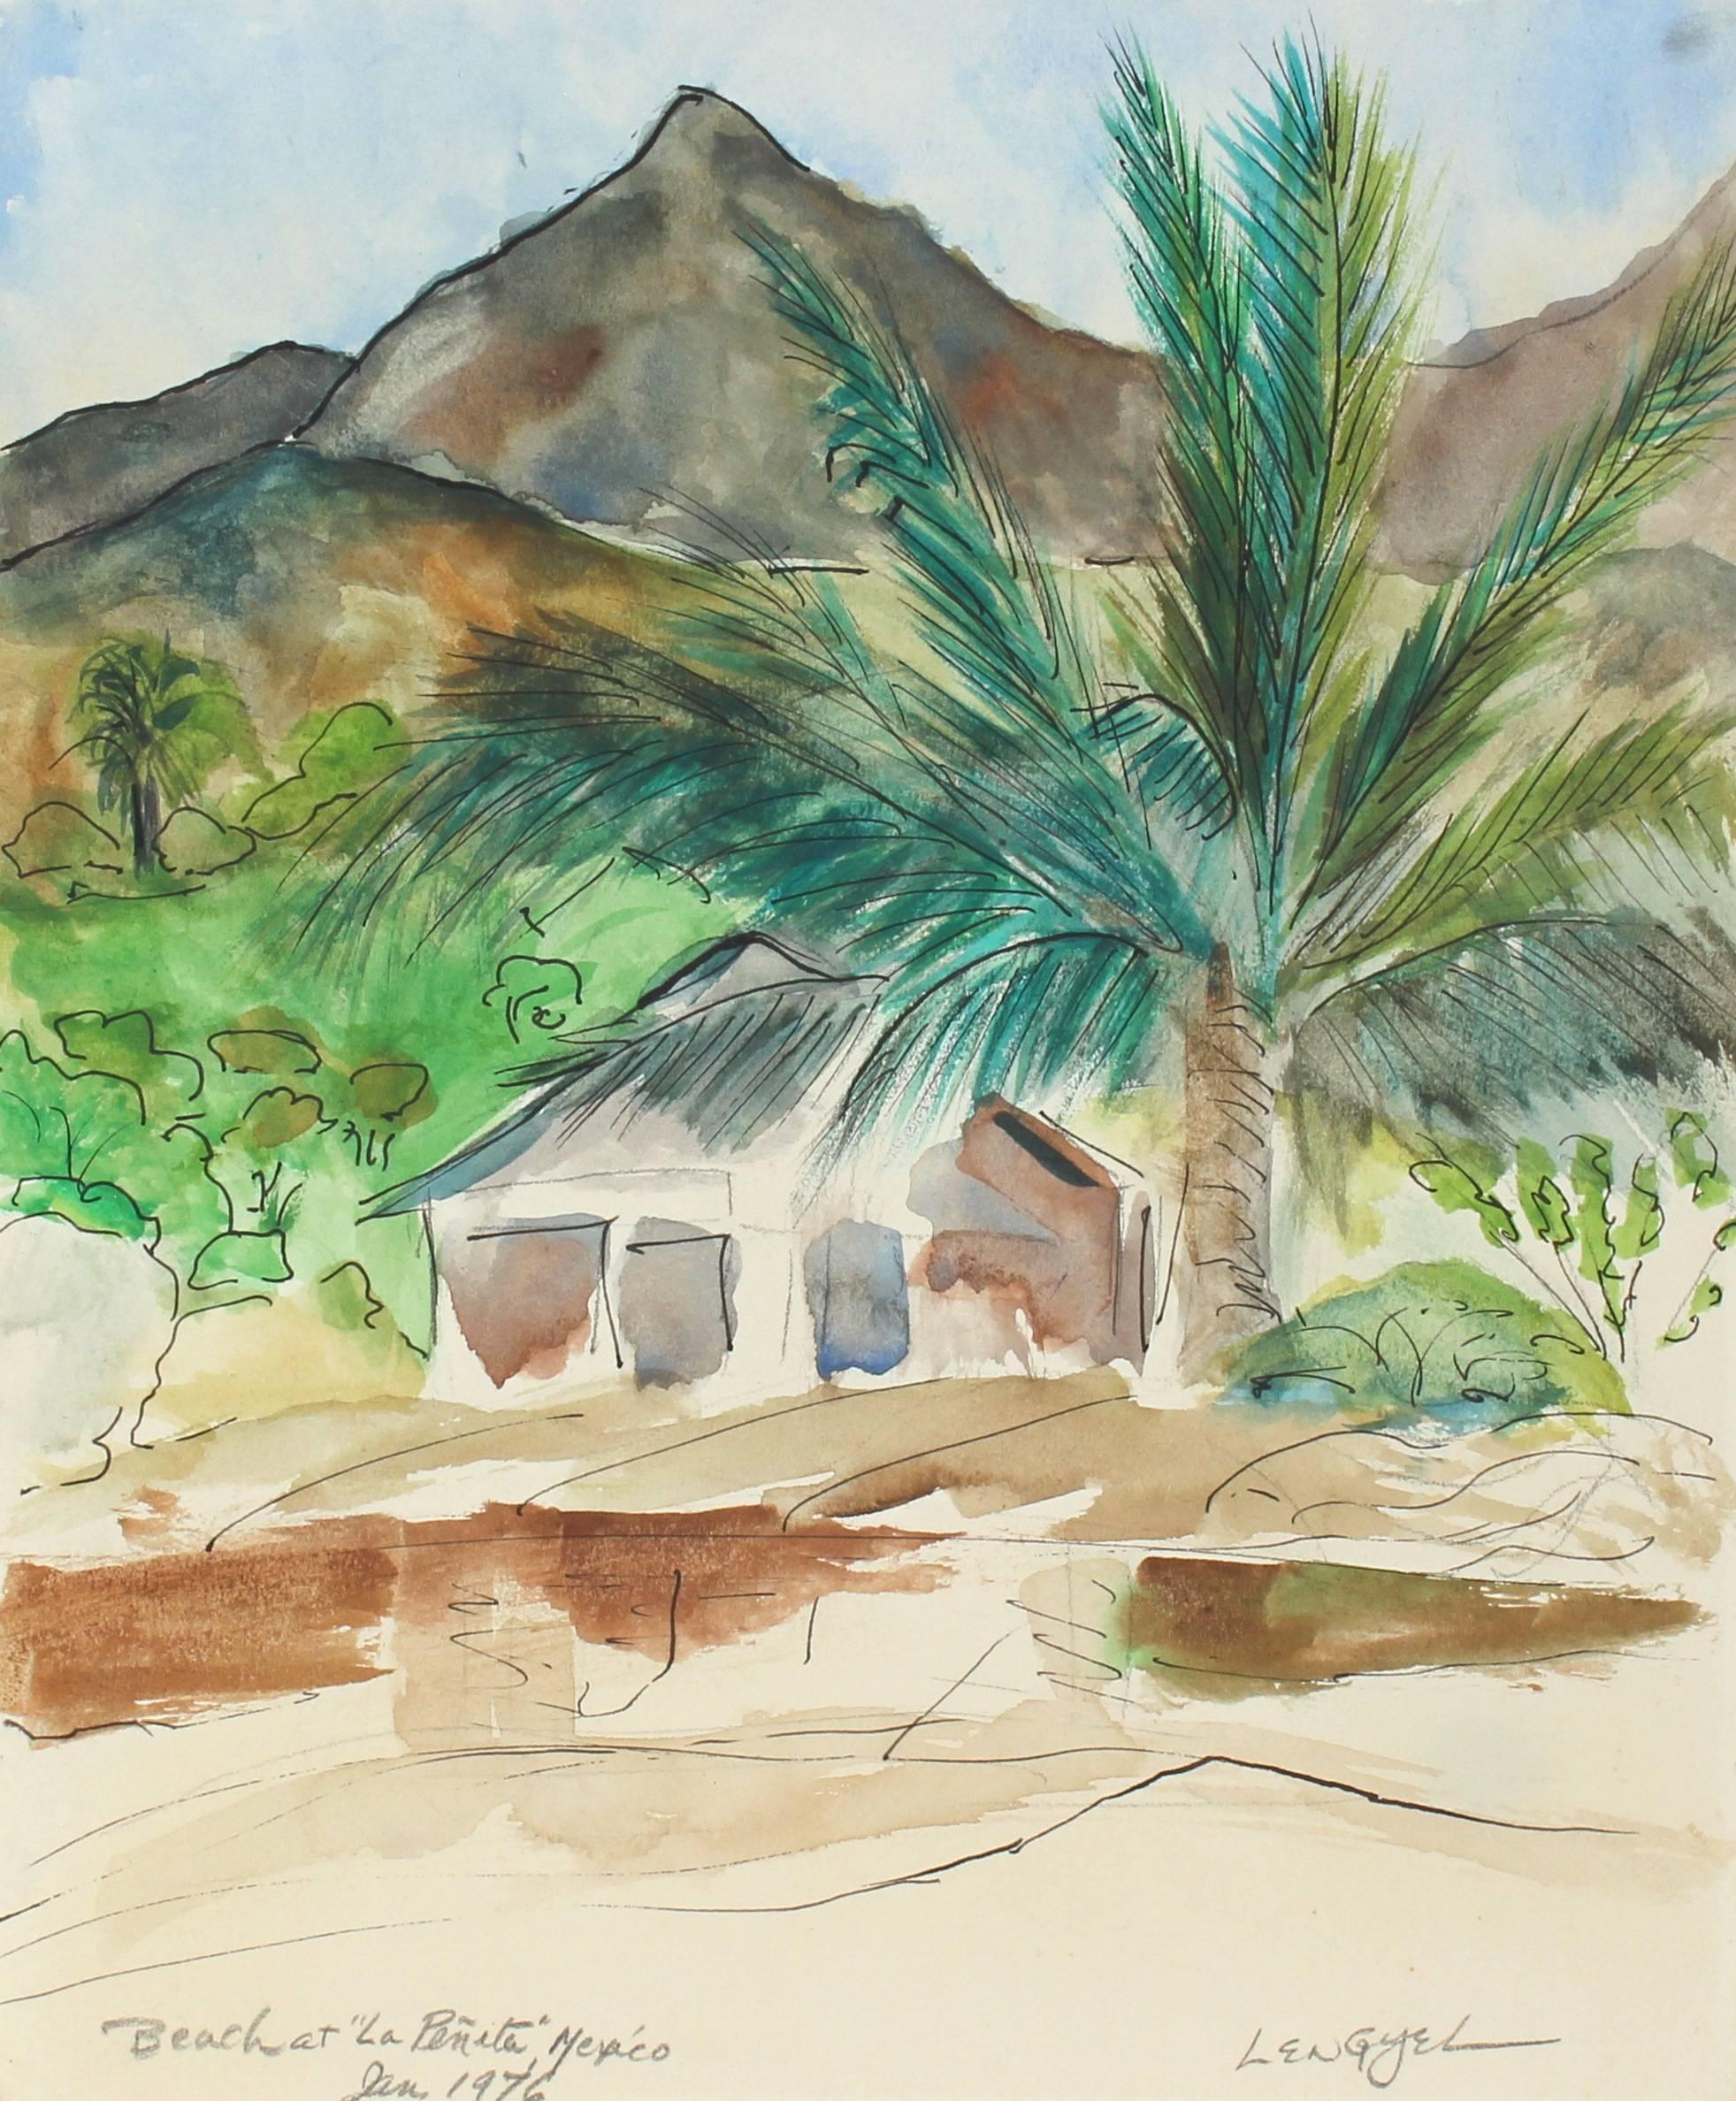 Laura Lengyel Landscape Art - "Beach at La Peñita, Mexico" Framed Landscape in Watercolor and Ink, 1976